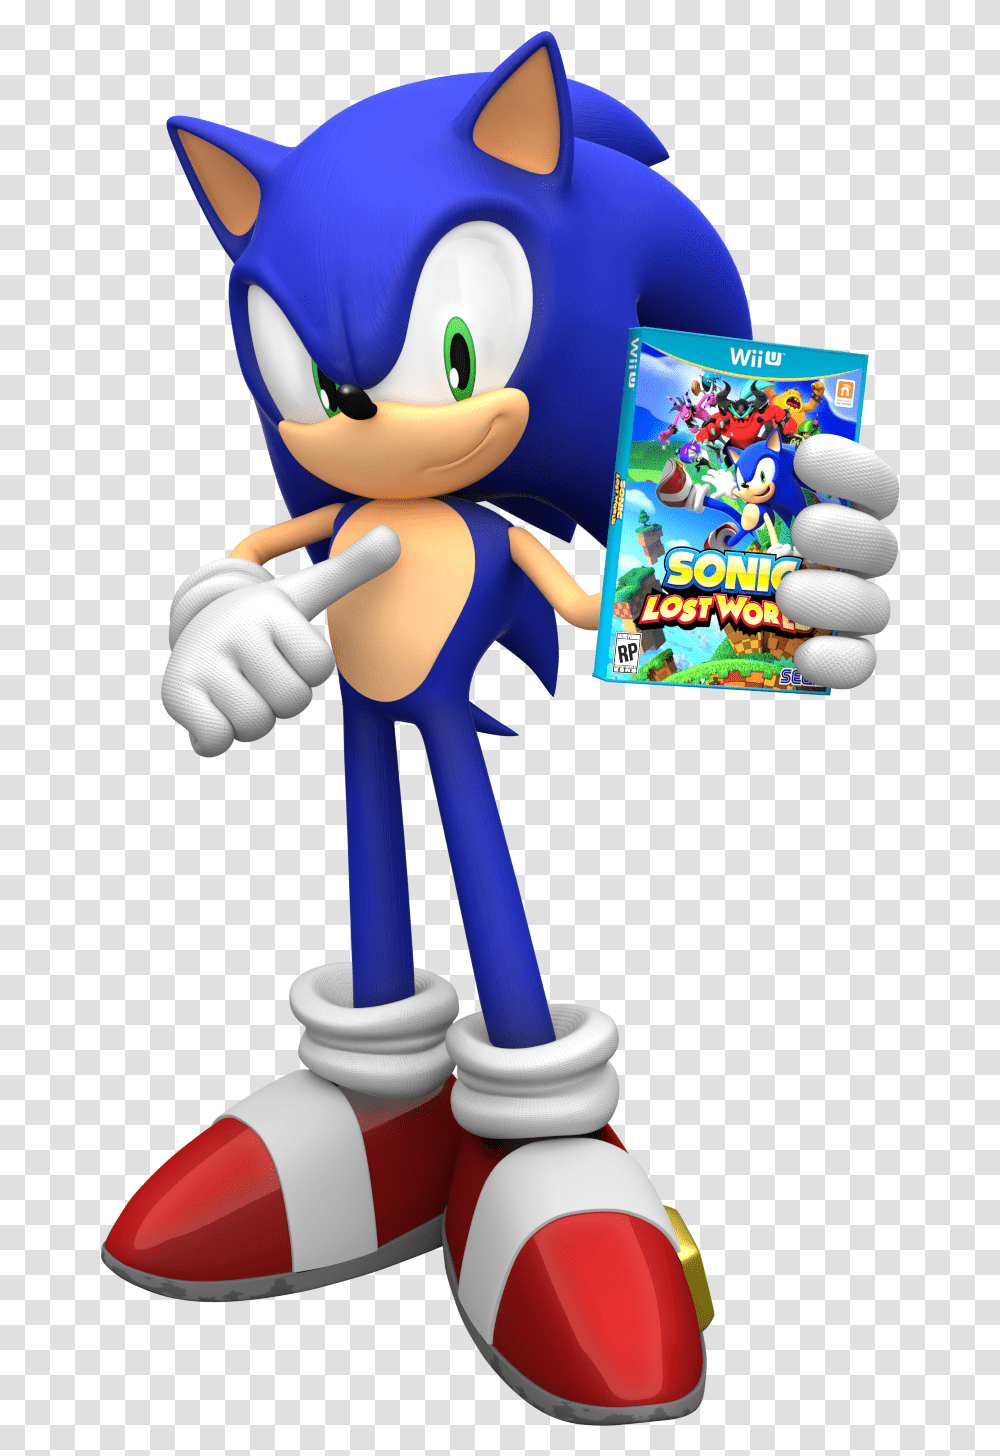 Sonic Lost World By Mintenndo Sonic Lost World Sonic, Toy, Figurine, Super Mario, Performer Transparent Png